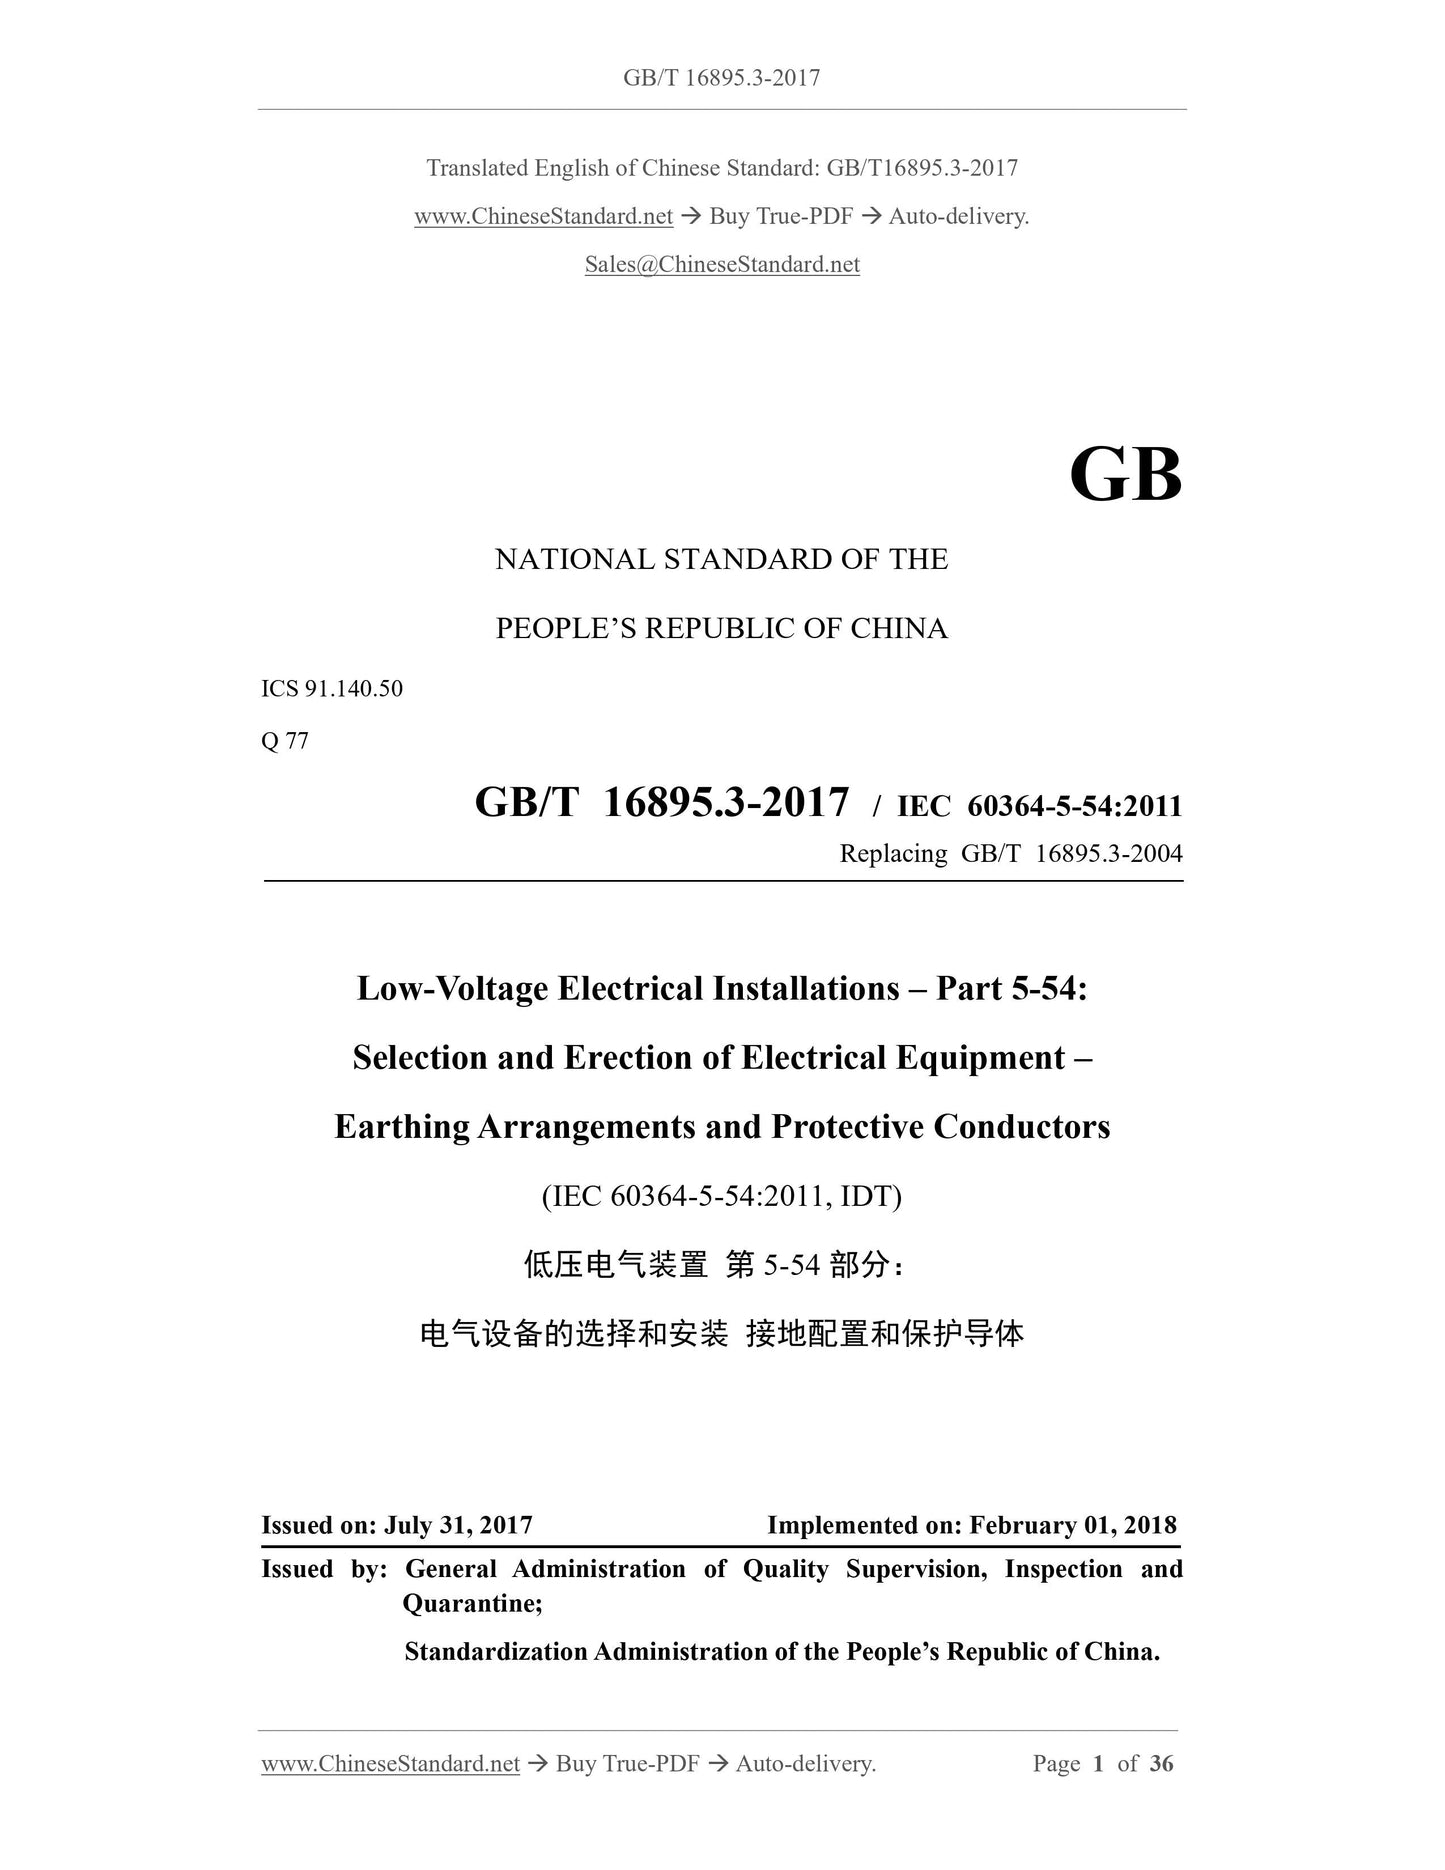 GB/T 16895.3-2017 Page 1